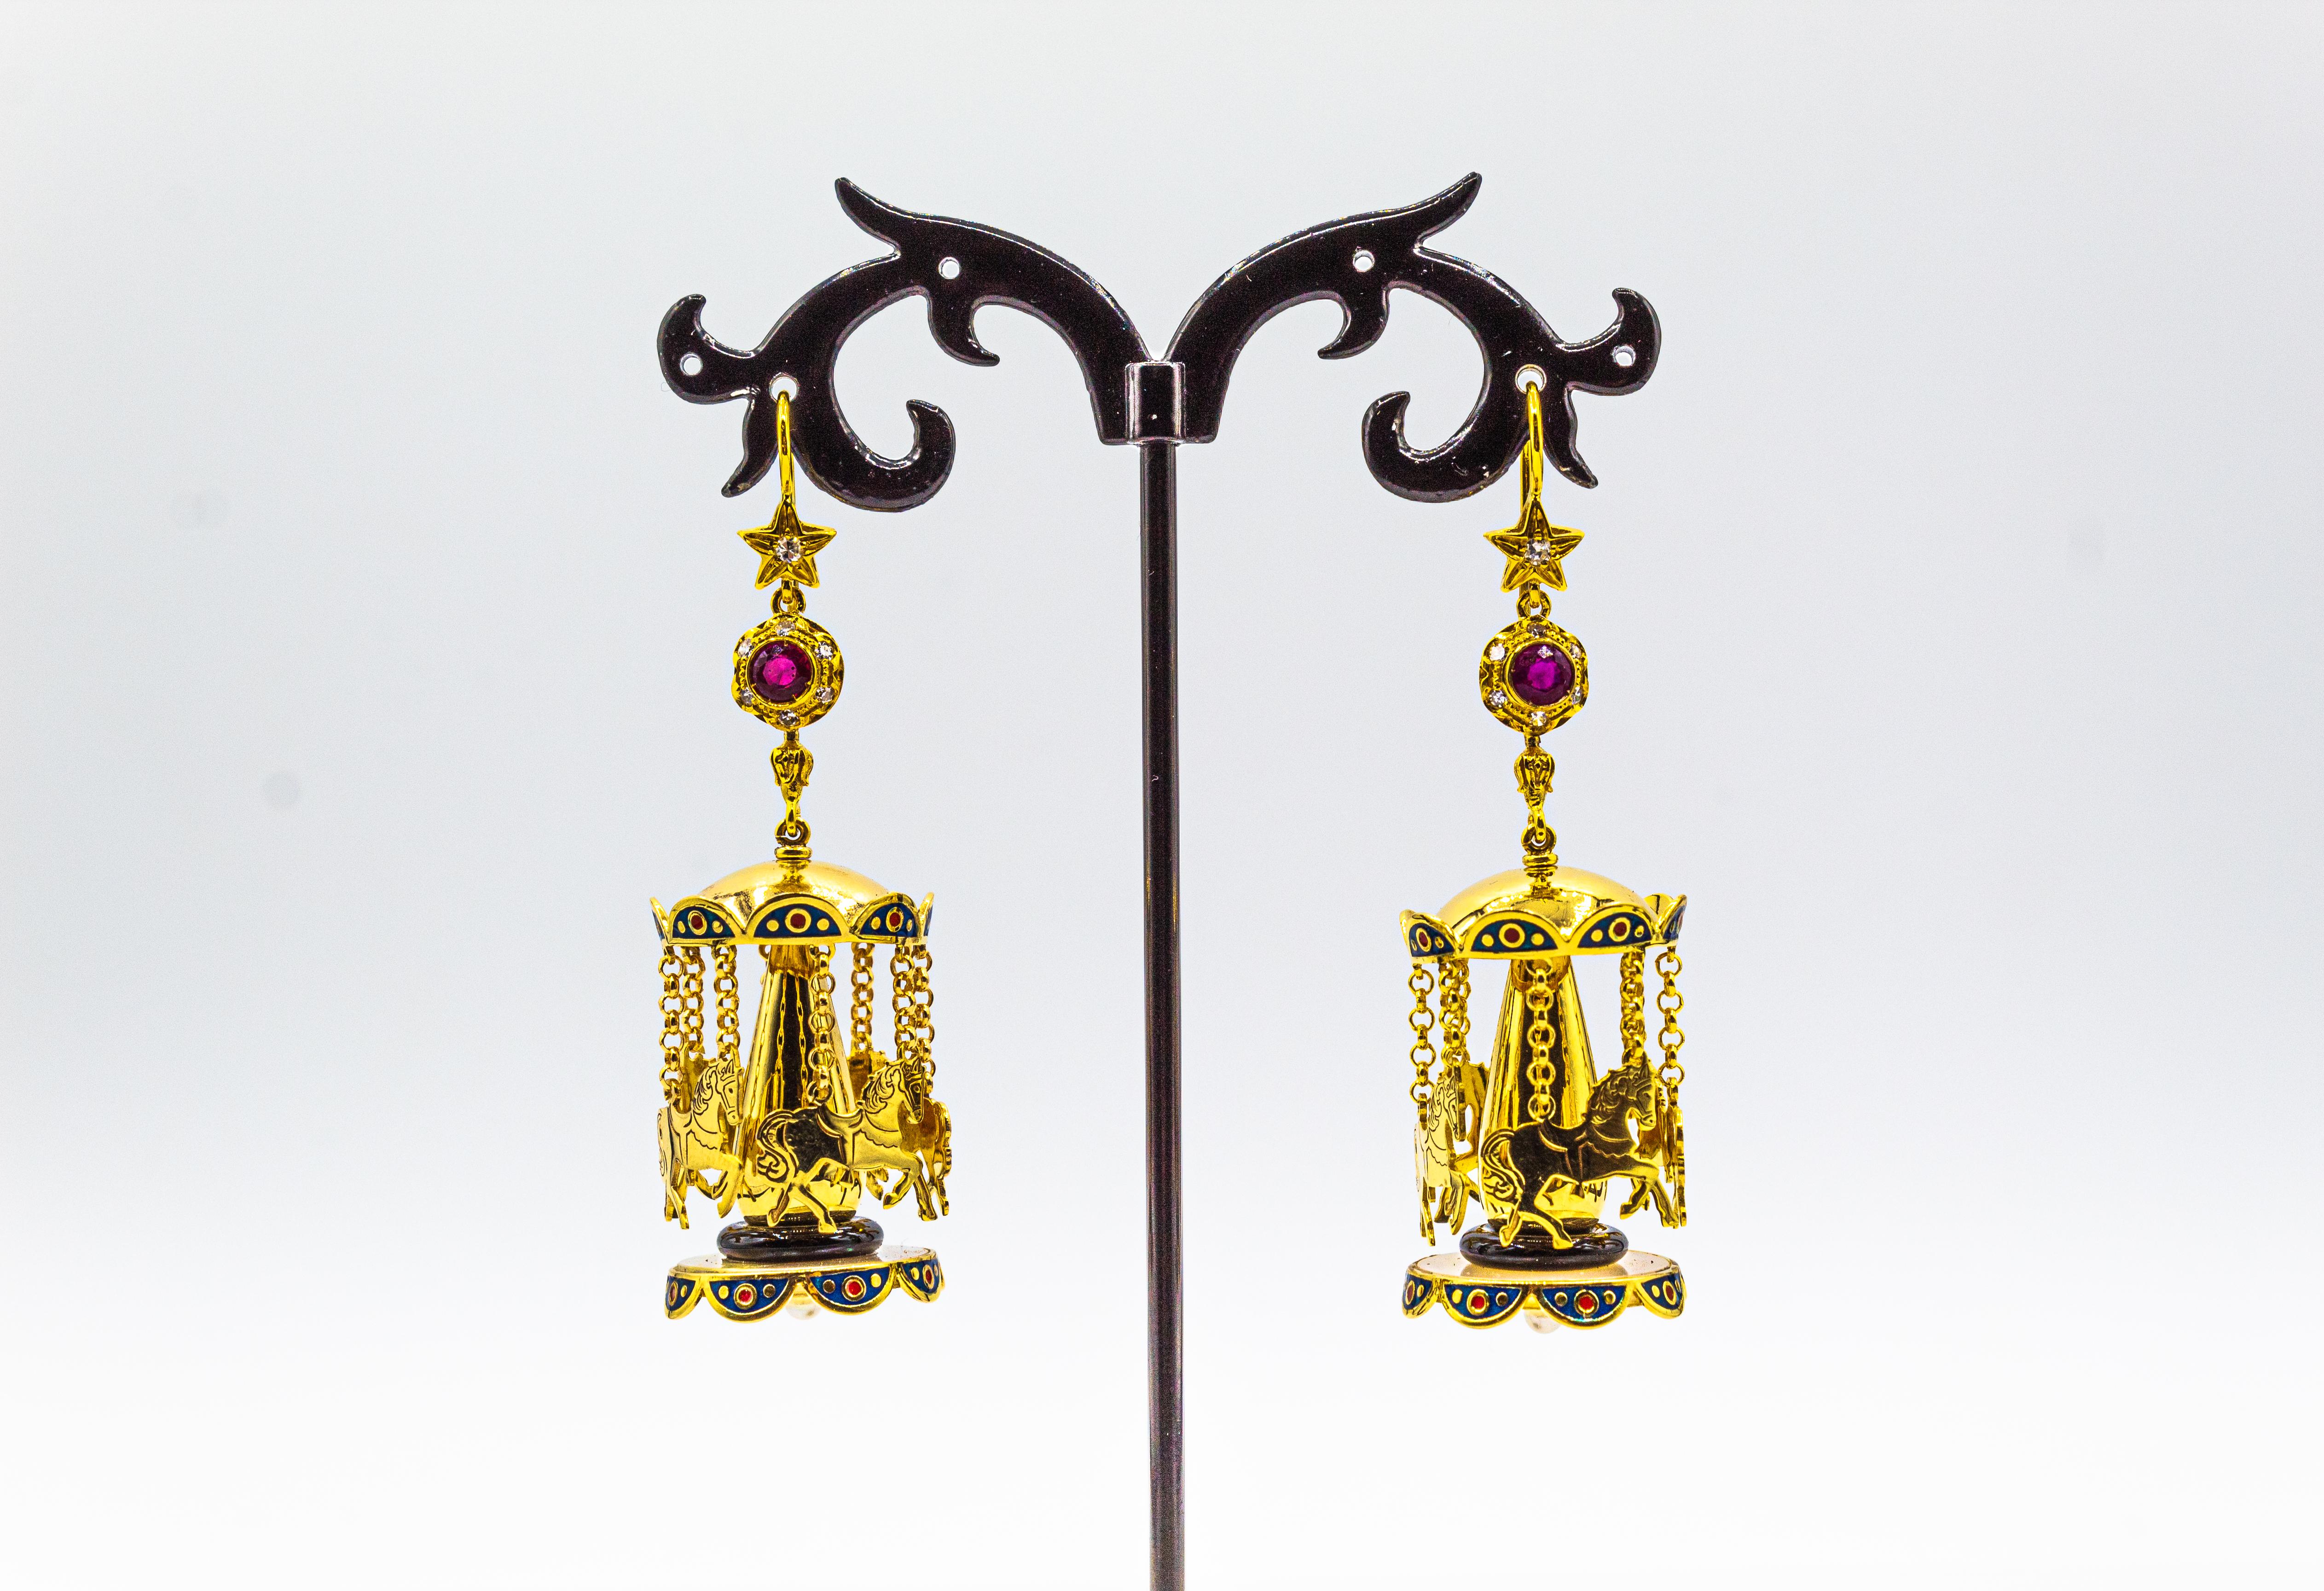 These Stud Earrings are made of 9K Yellow Gold.
These Earrings have 0.25 Carats of White Brilliant Cut Diamonds.
These Earrings have 0.80 Carats of Rubies.
These Earrings have Mother of Pearl and Onyx.
These Earrings have also Enamel and